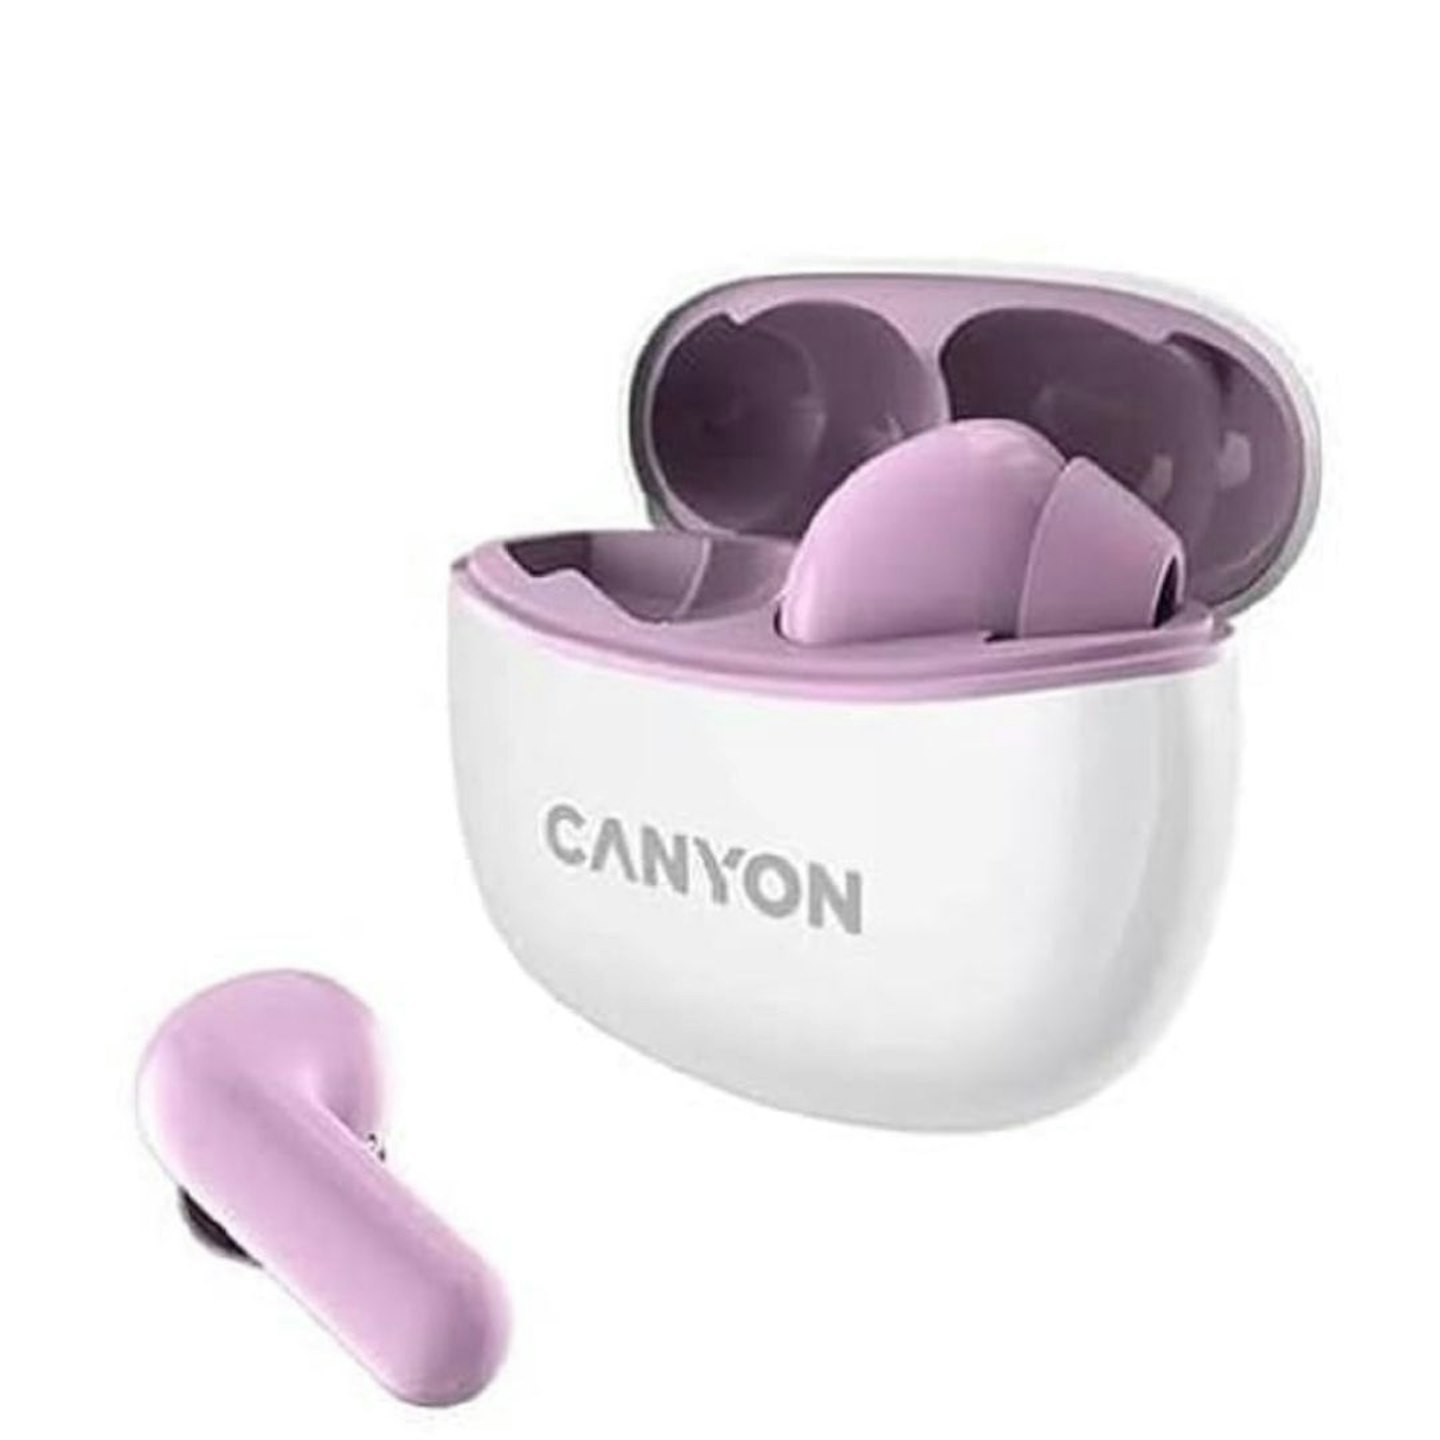  Best Christmas Gifts For Kids: CANYON TRUE WIRELESS HEADSET TWS-5 PURPLE